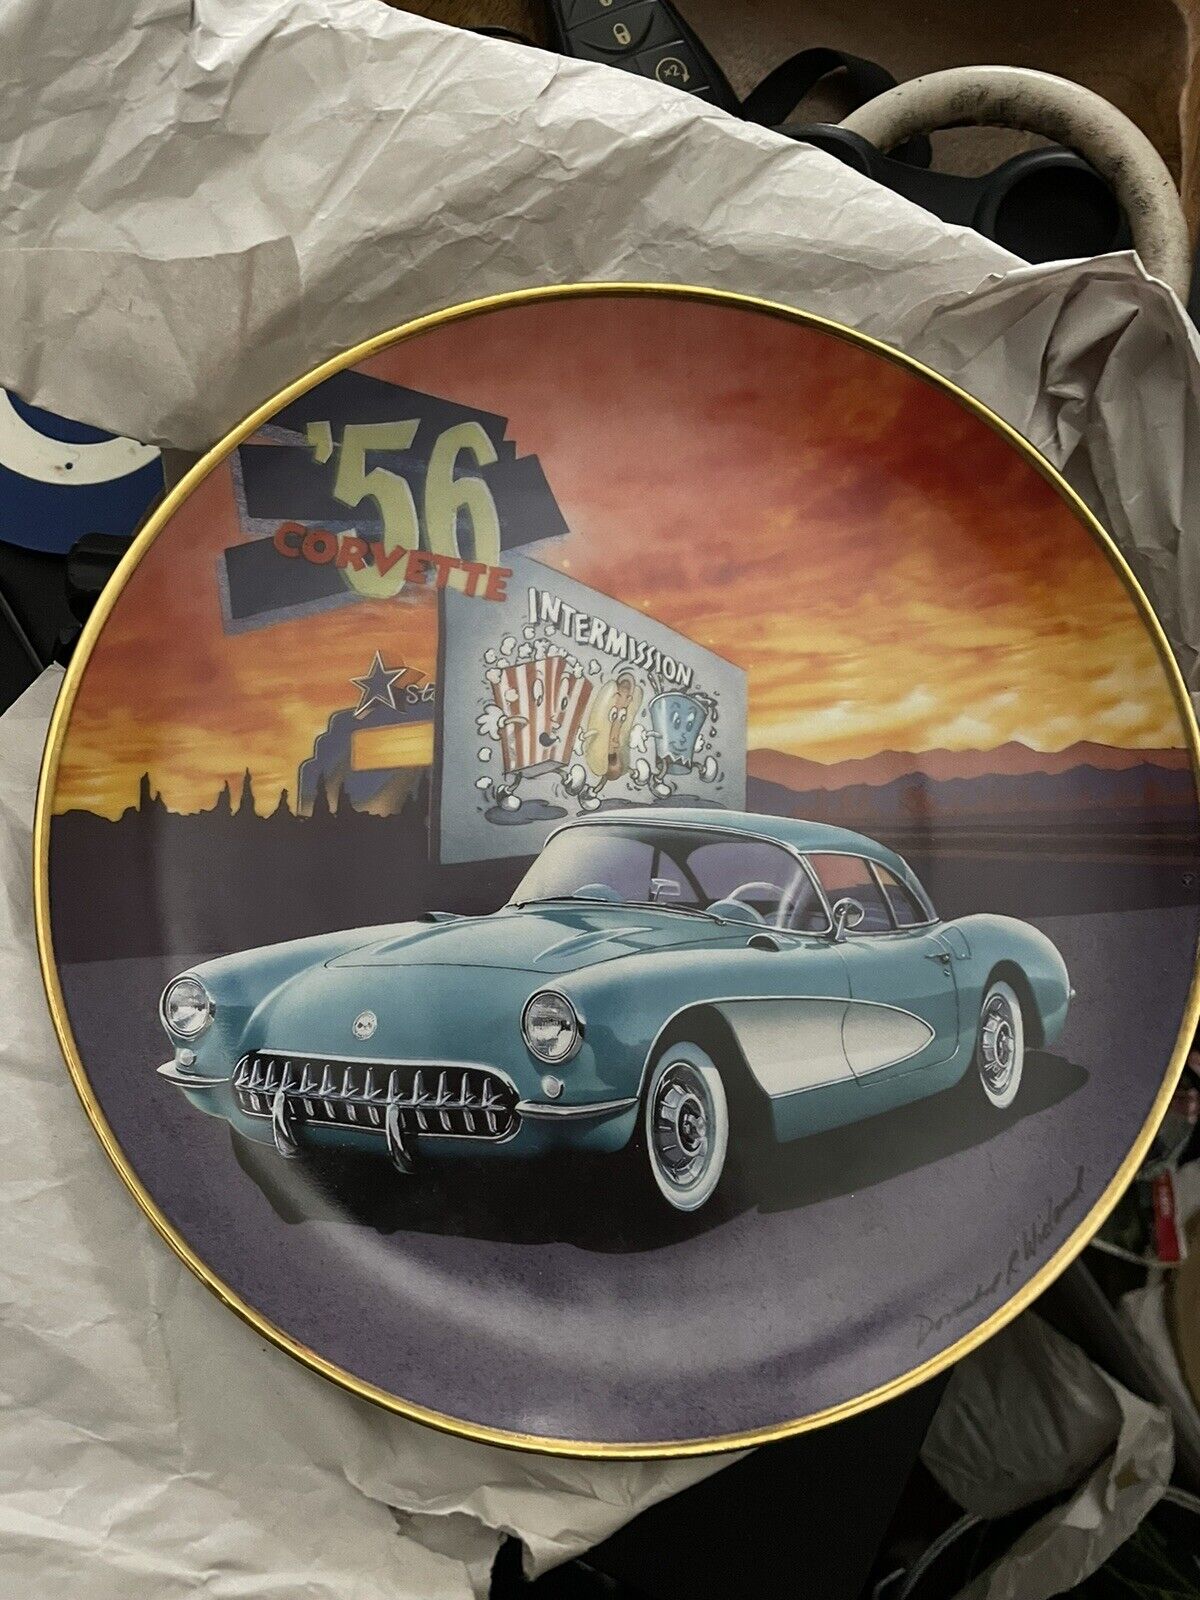 Franklin Mint Limited Edition ‘56 Chevy Corvette Collectors Plate